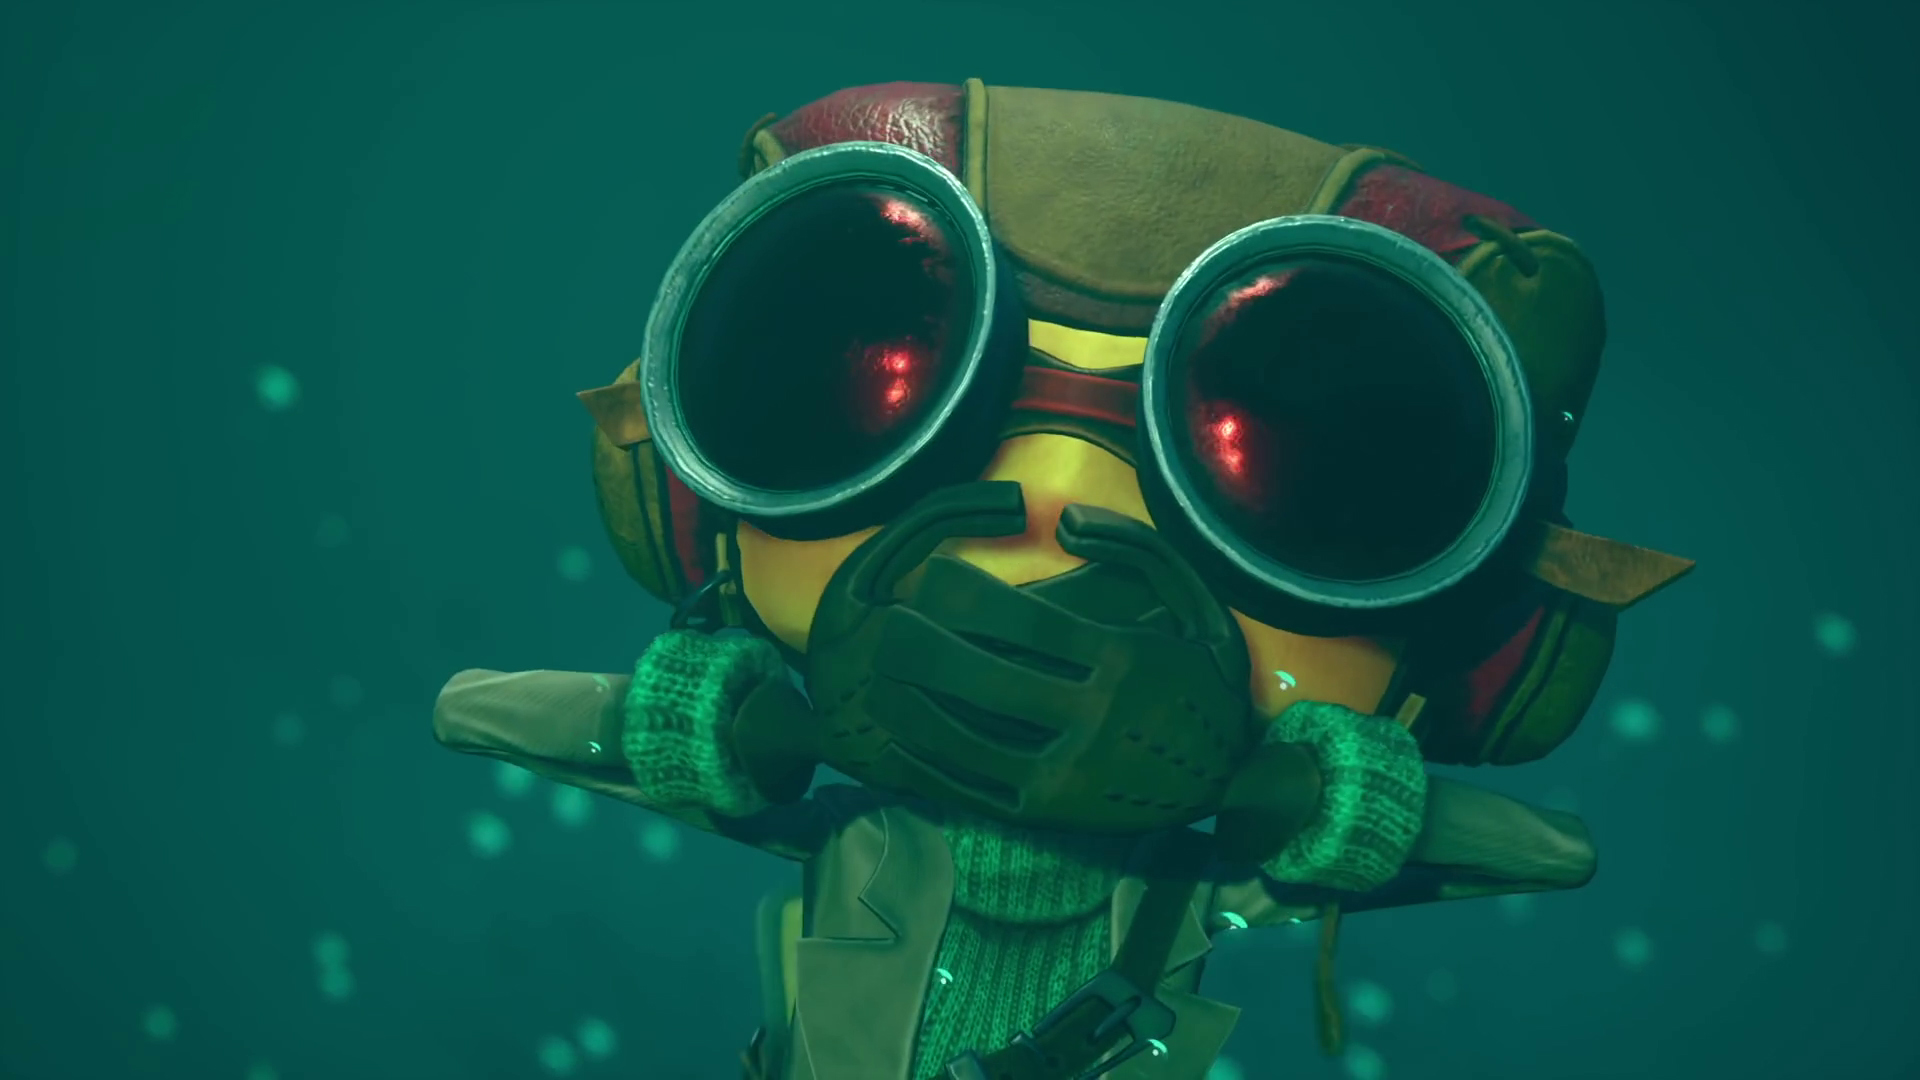  Psychonauts creator Tim Schafer says he's never read anything that was 'meaningful, important or worthwhile' created by AI 